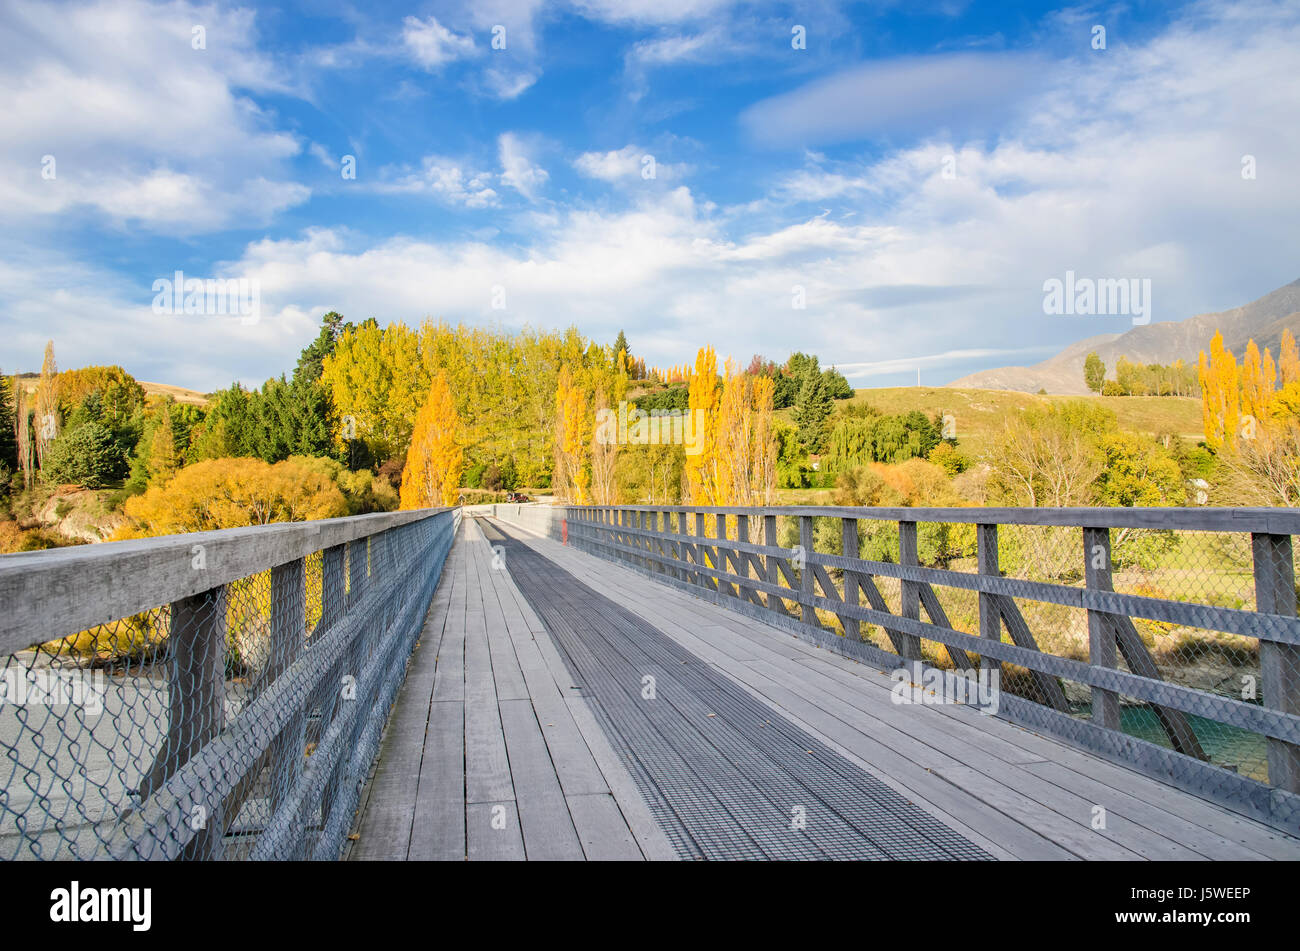 The Historic Bridge over Shotover River in Arrowtown, New Zealand. Stock Photo